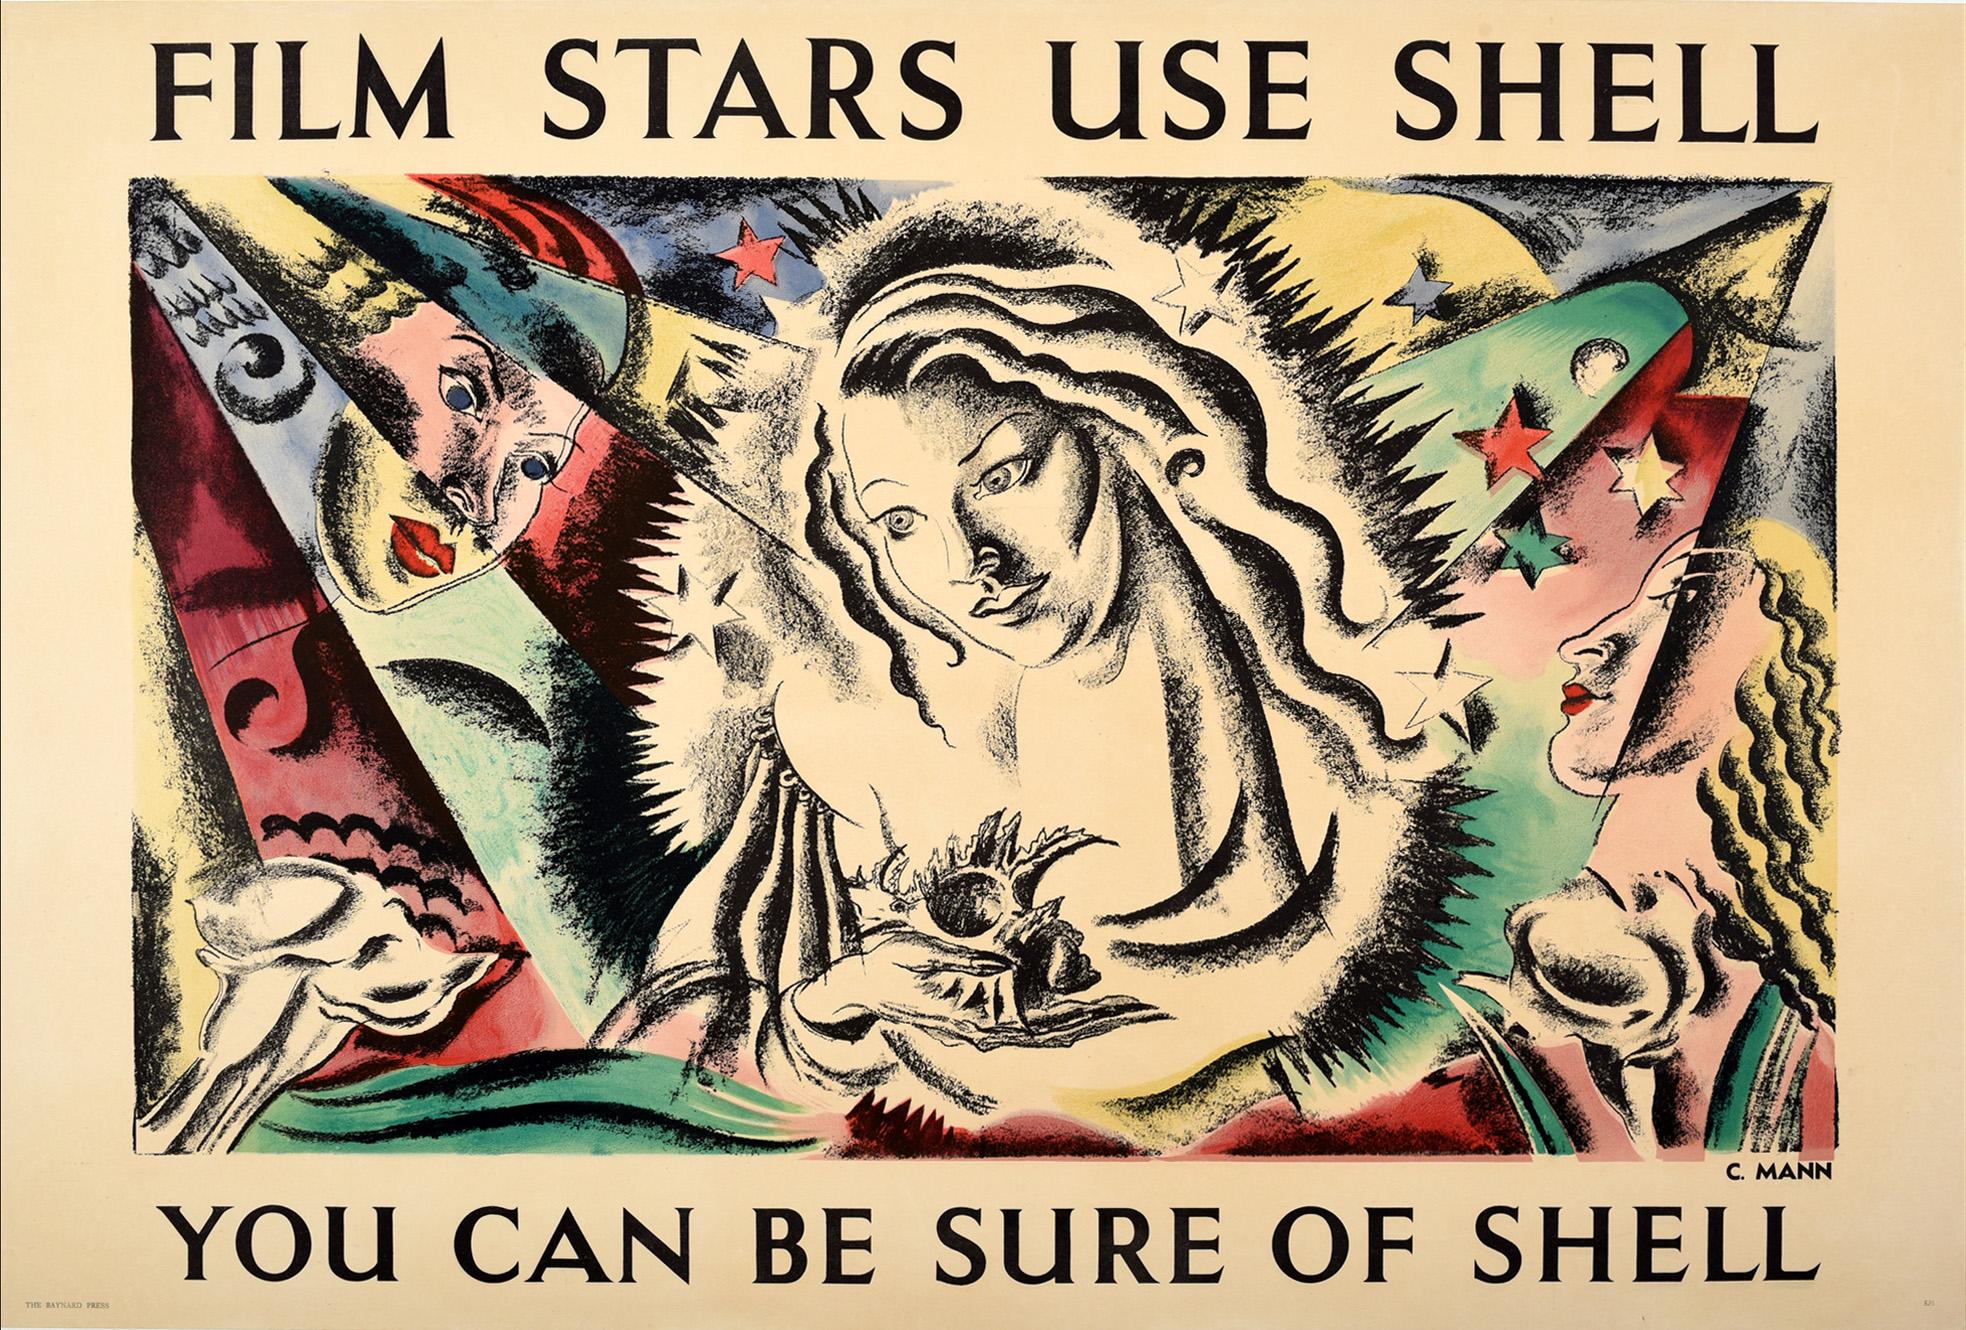 Cathleen Mann Print - Original Vintage Shell Poster Film Stars Use Shell You Can Be Sure Of Shell